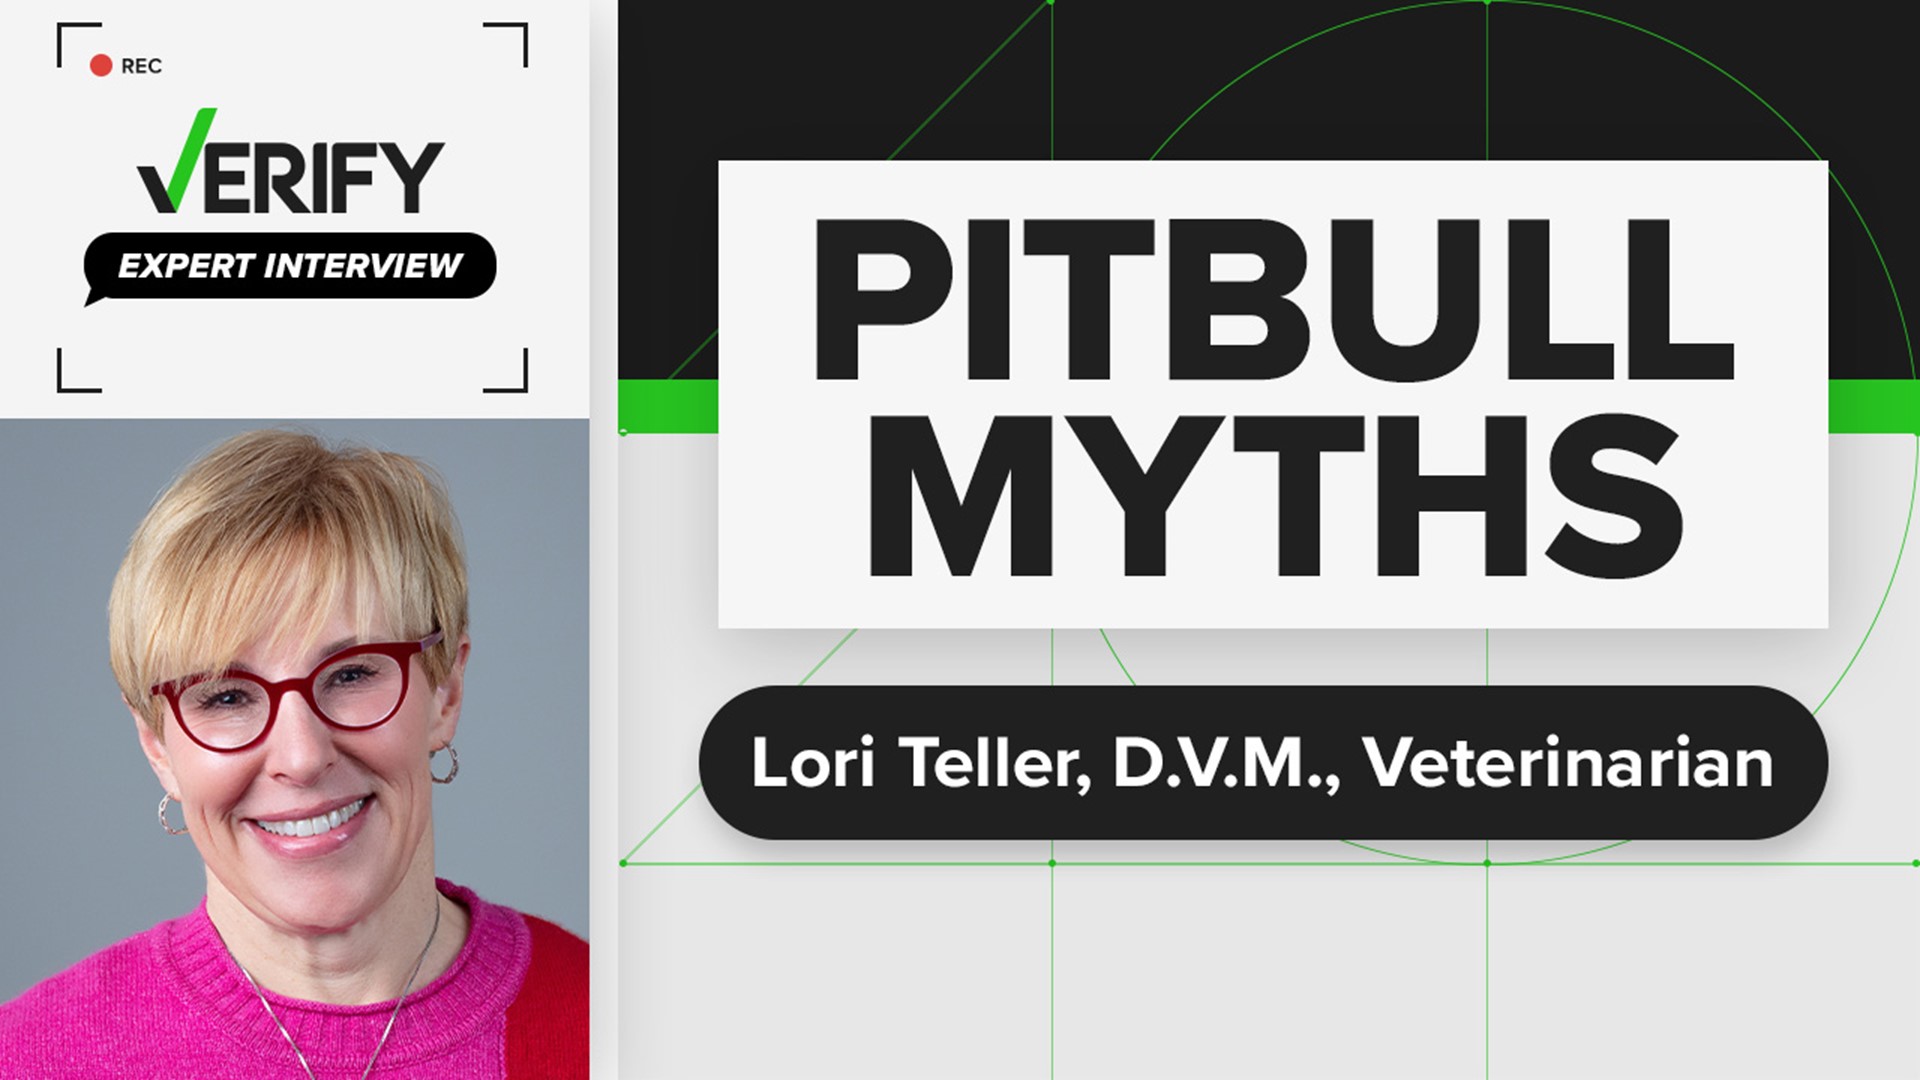 The myth that pitbulls are naturally aggressive dogs needs context and clarity. Lori Teller, D.V.M. talks about the myth of aggressive dogs.